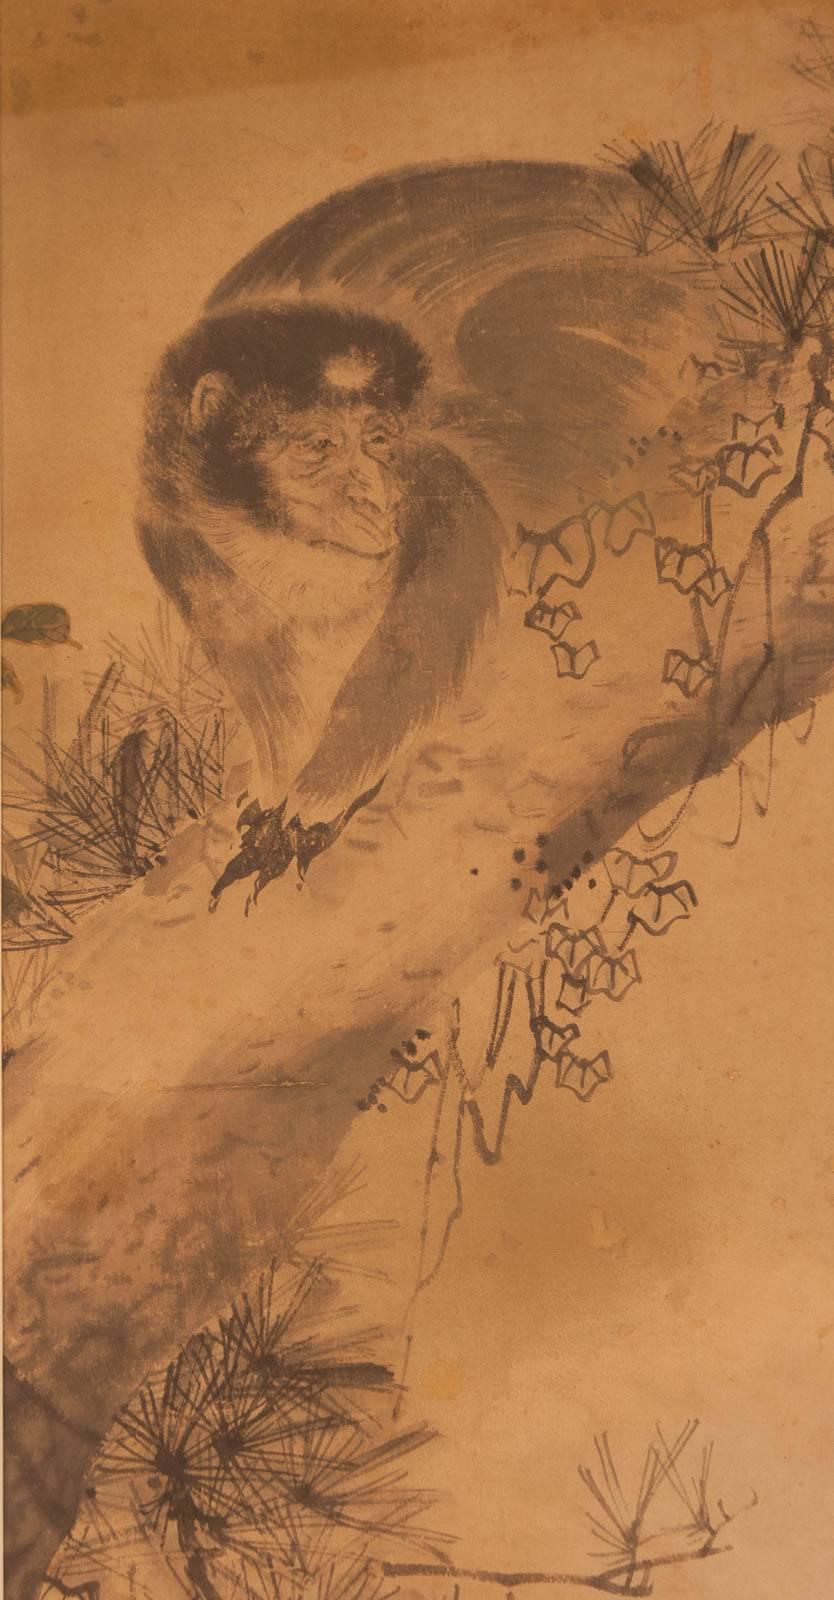 Japonisme Edo Period Japanese Ink on Paper Painting of an Old Monkey, circa 1820